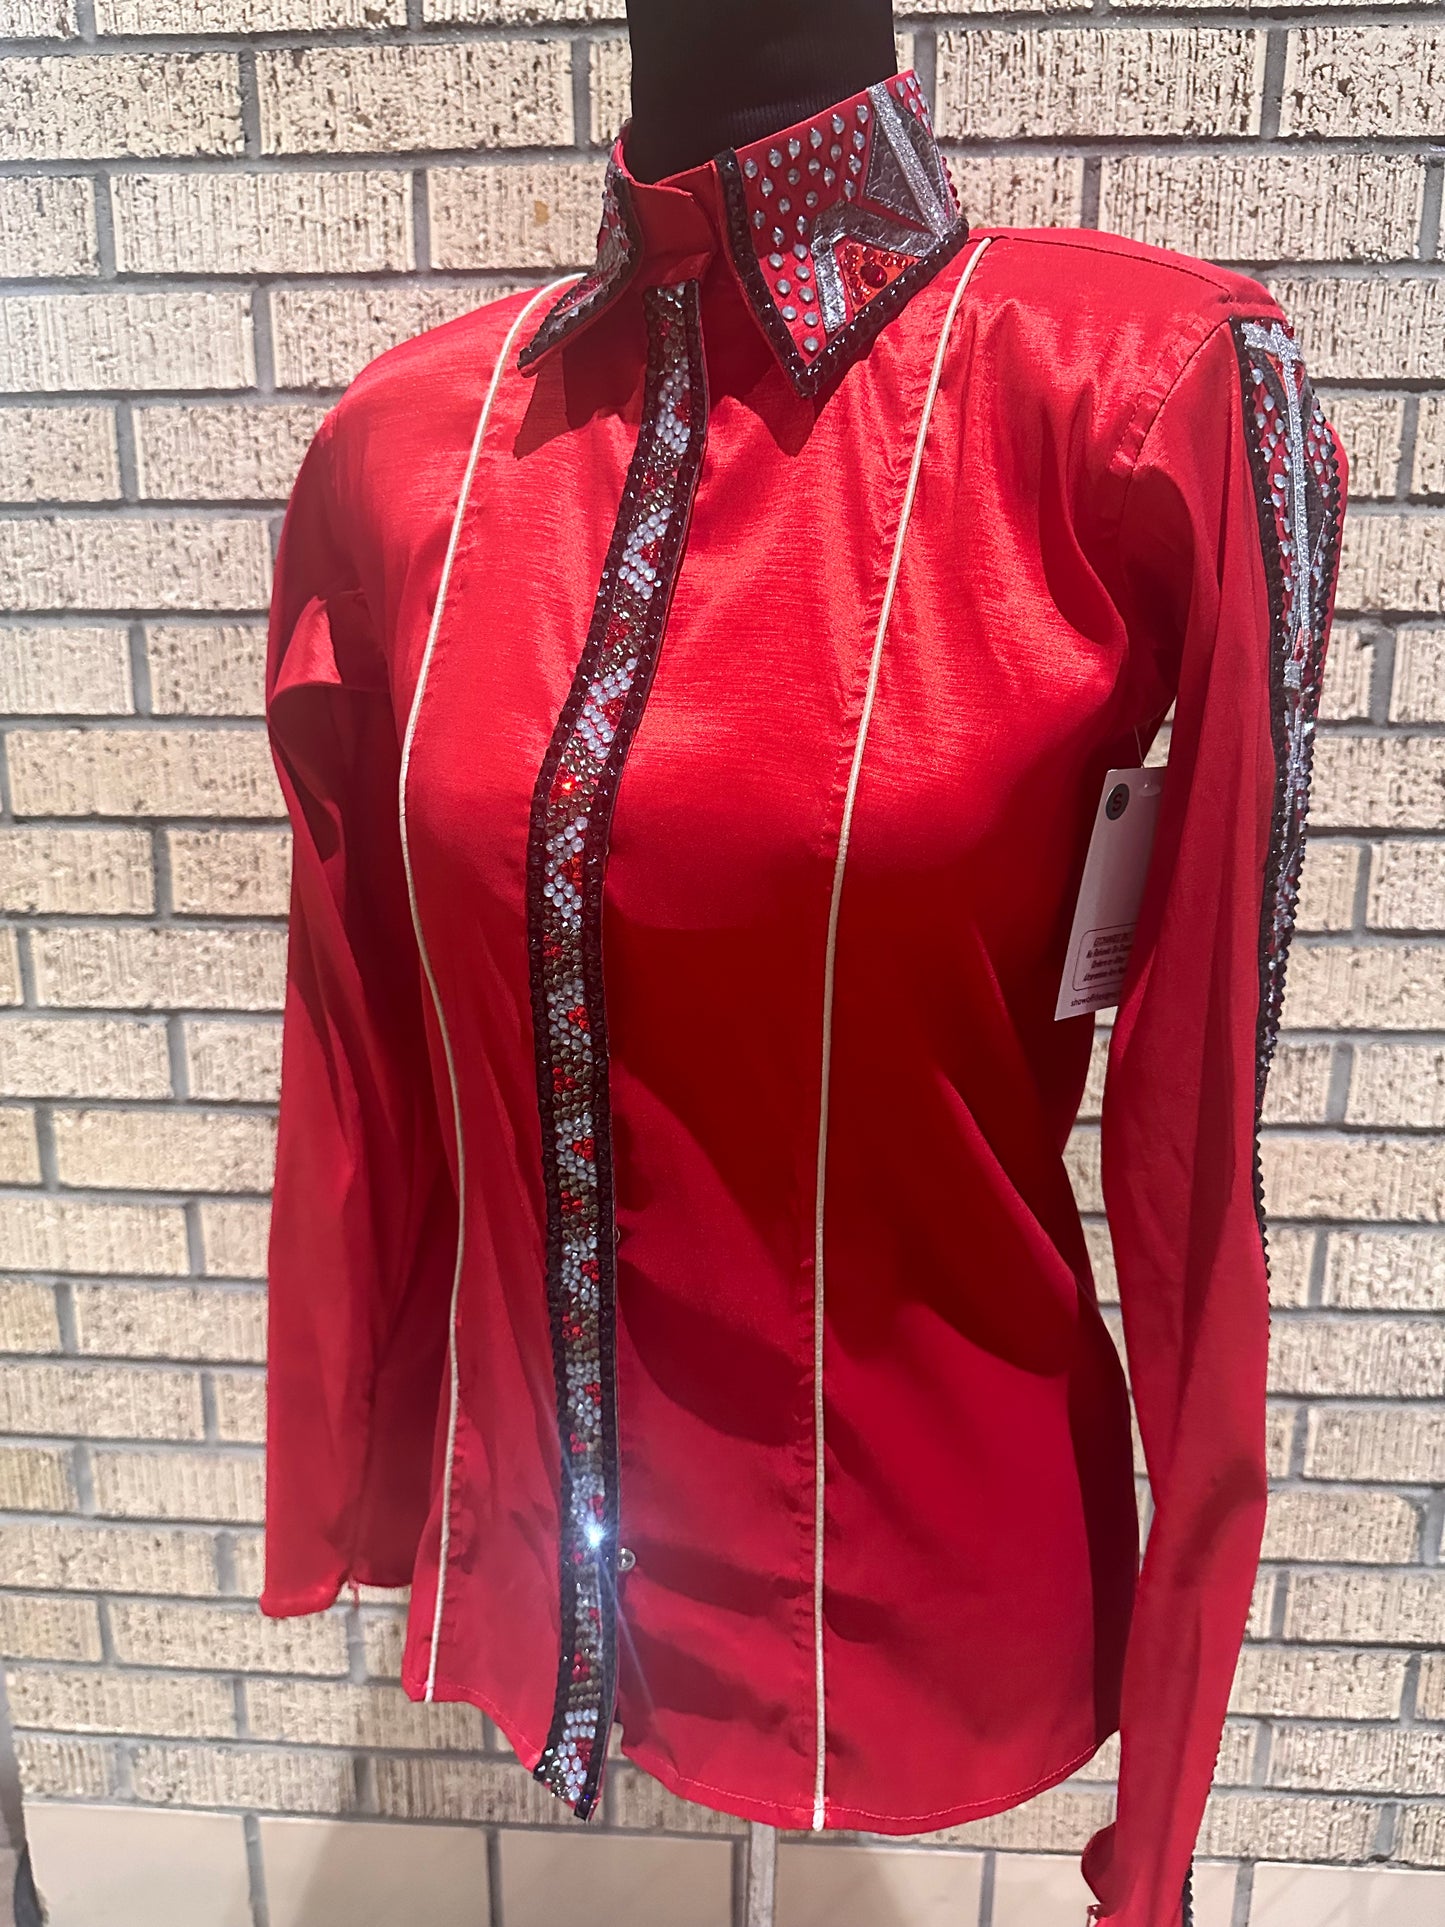 Size small day shirt red, grey and black zippered sleeves